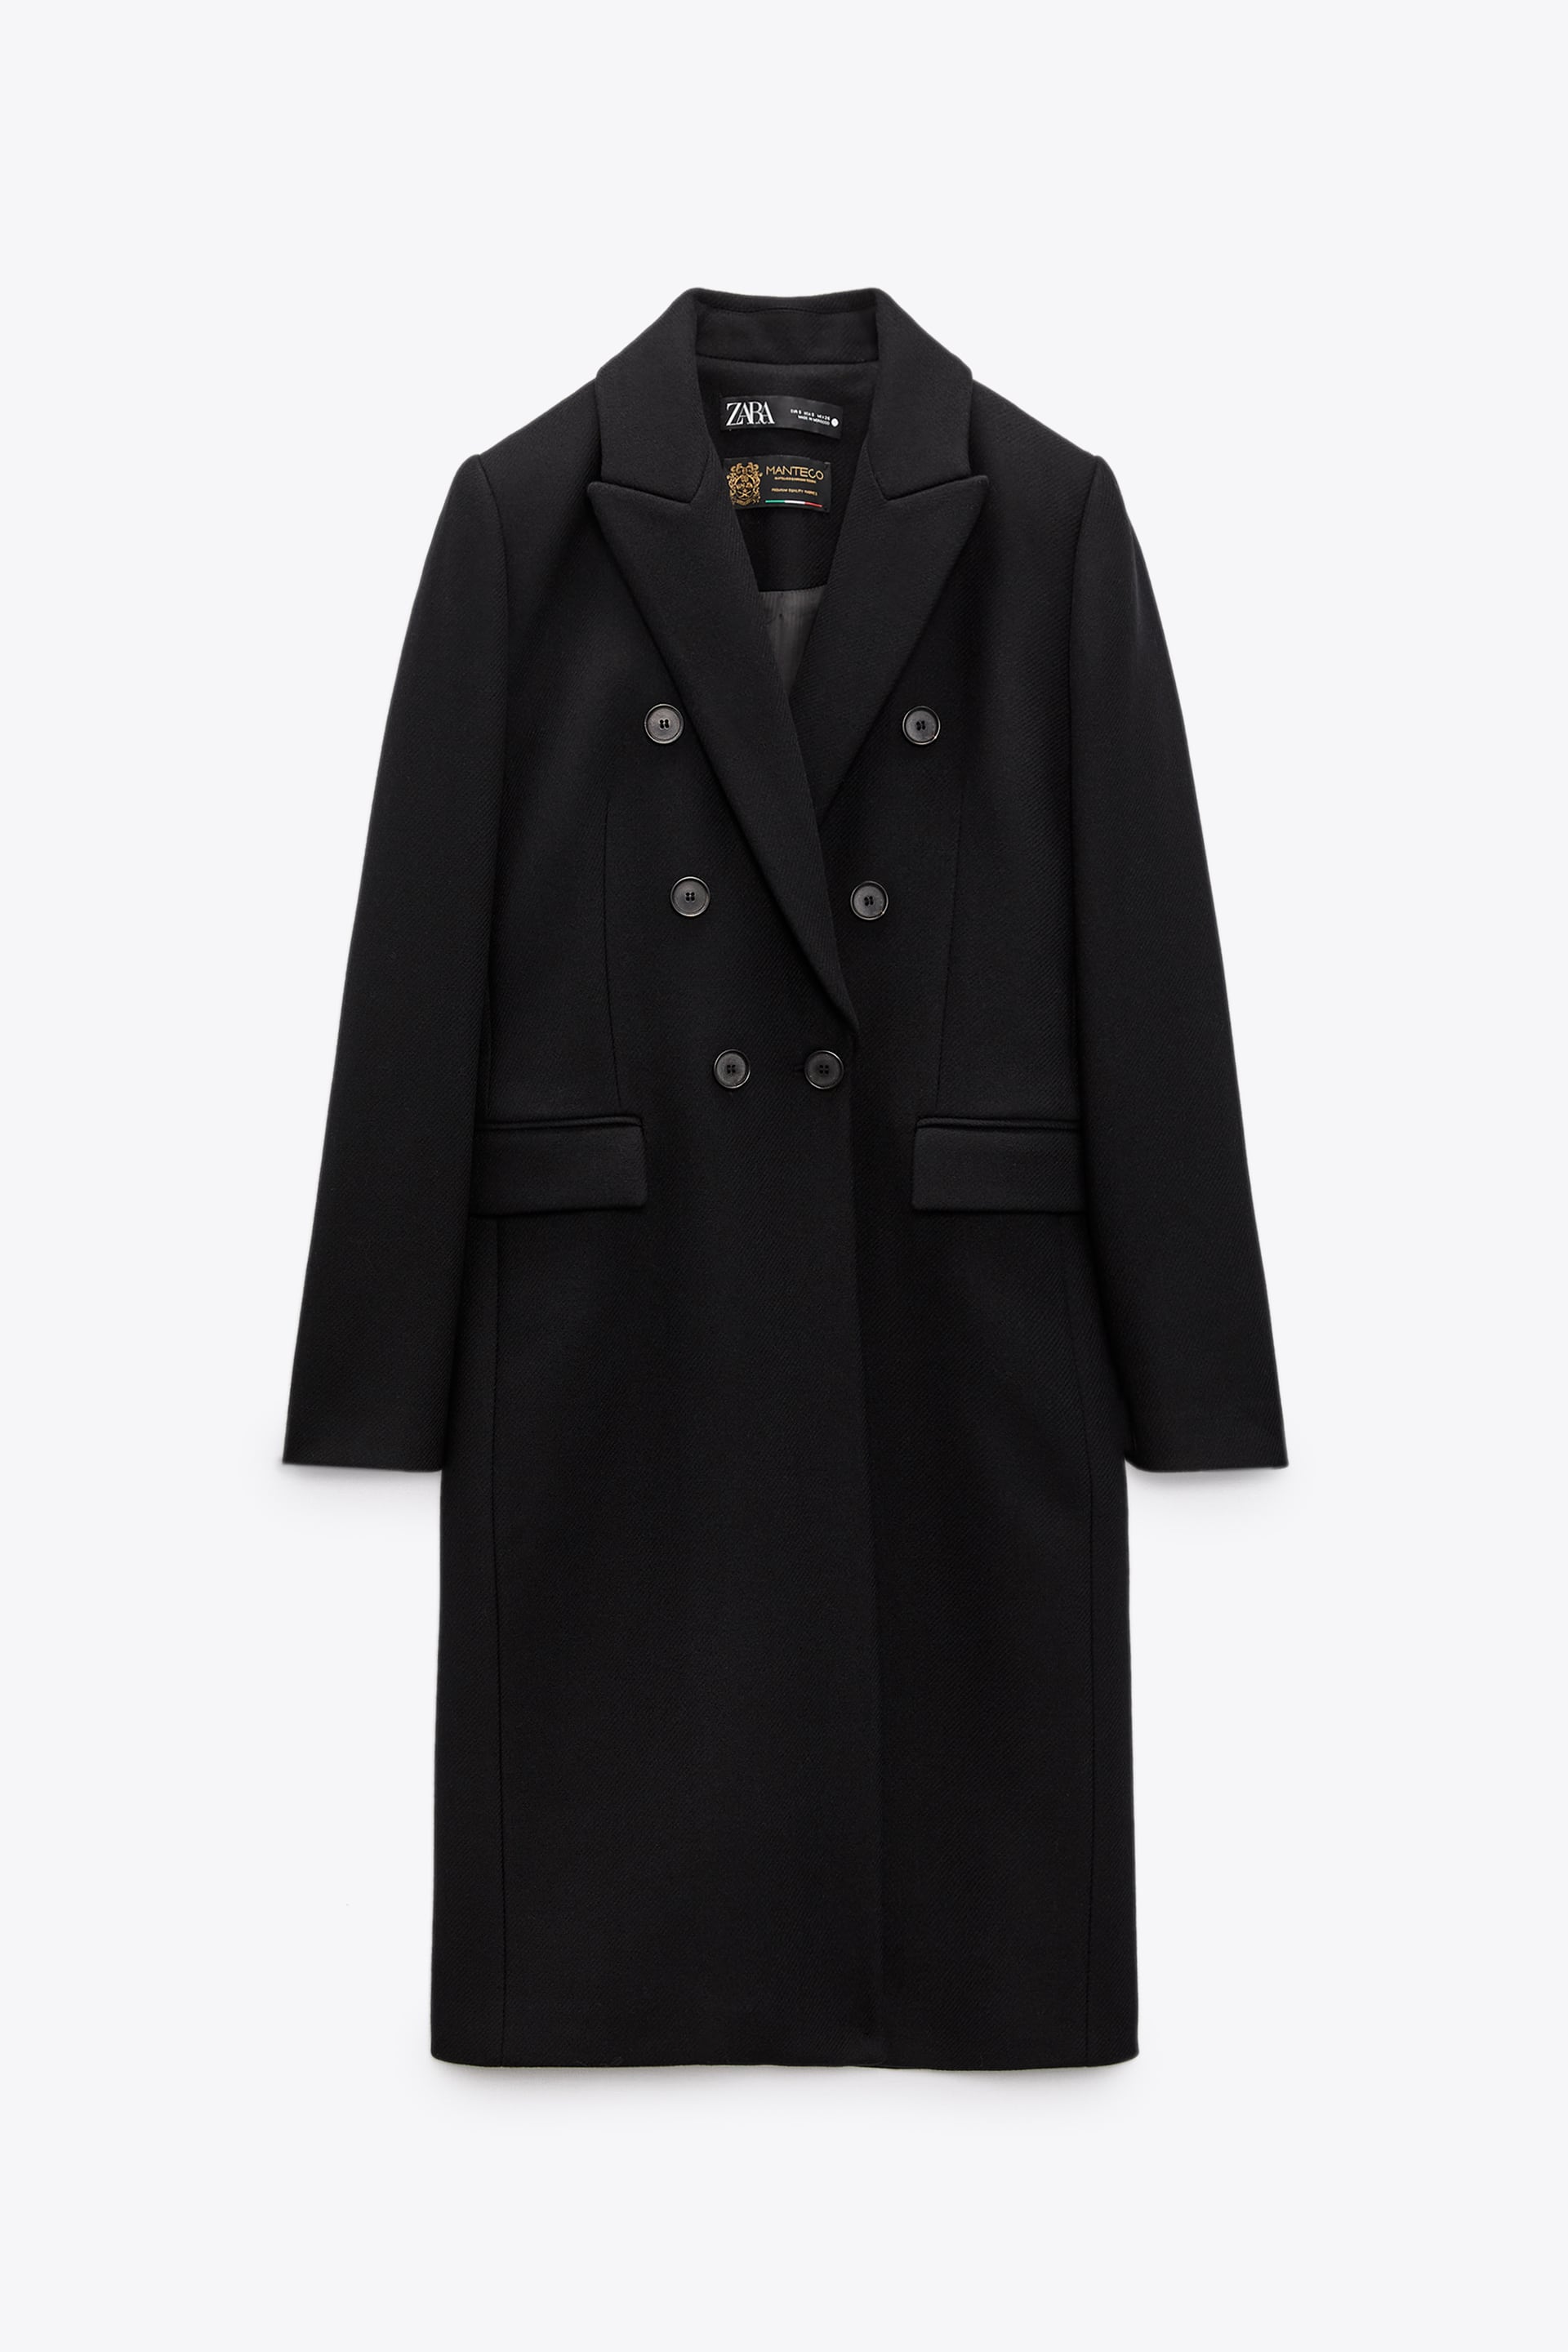 Details about   Zara Masculine Cross-Over Double Breasted Tailored Wool Sold Coat M L